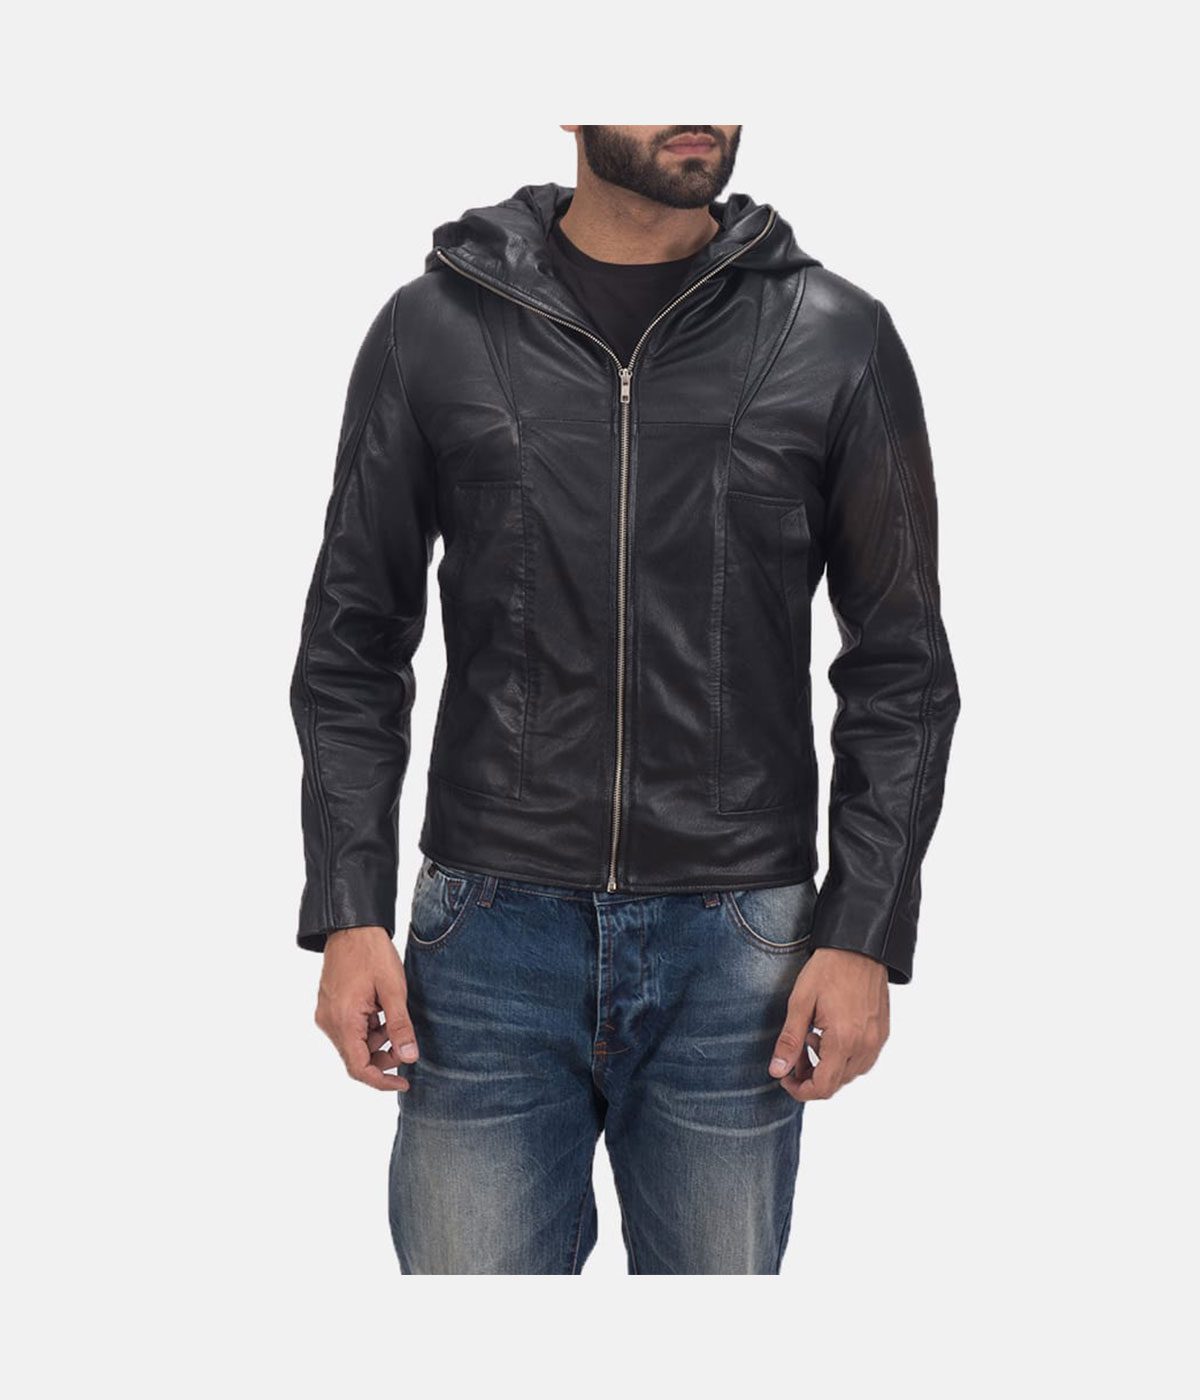 Mens Black Leather Jacket with Hood - Modern Leather Jackets